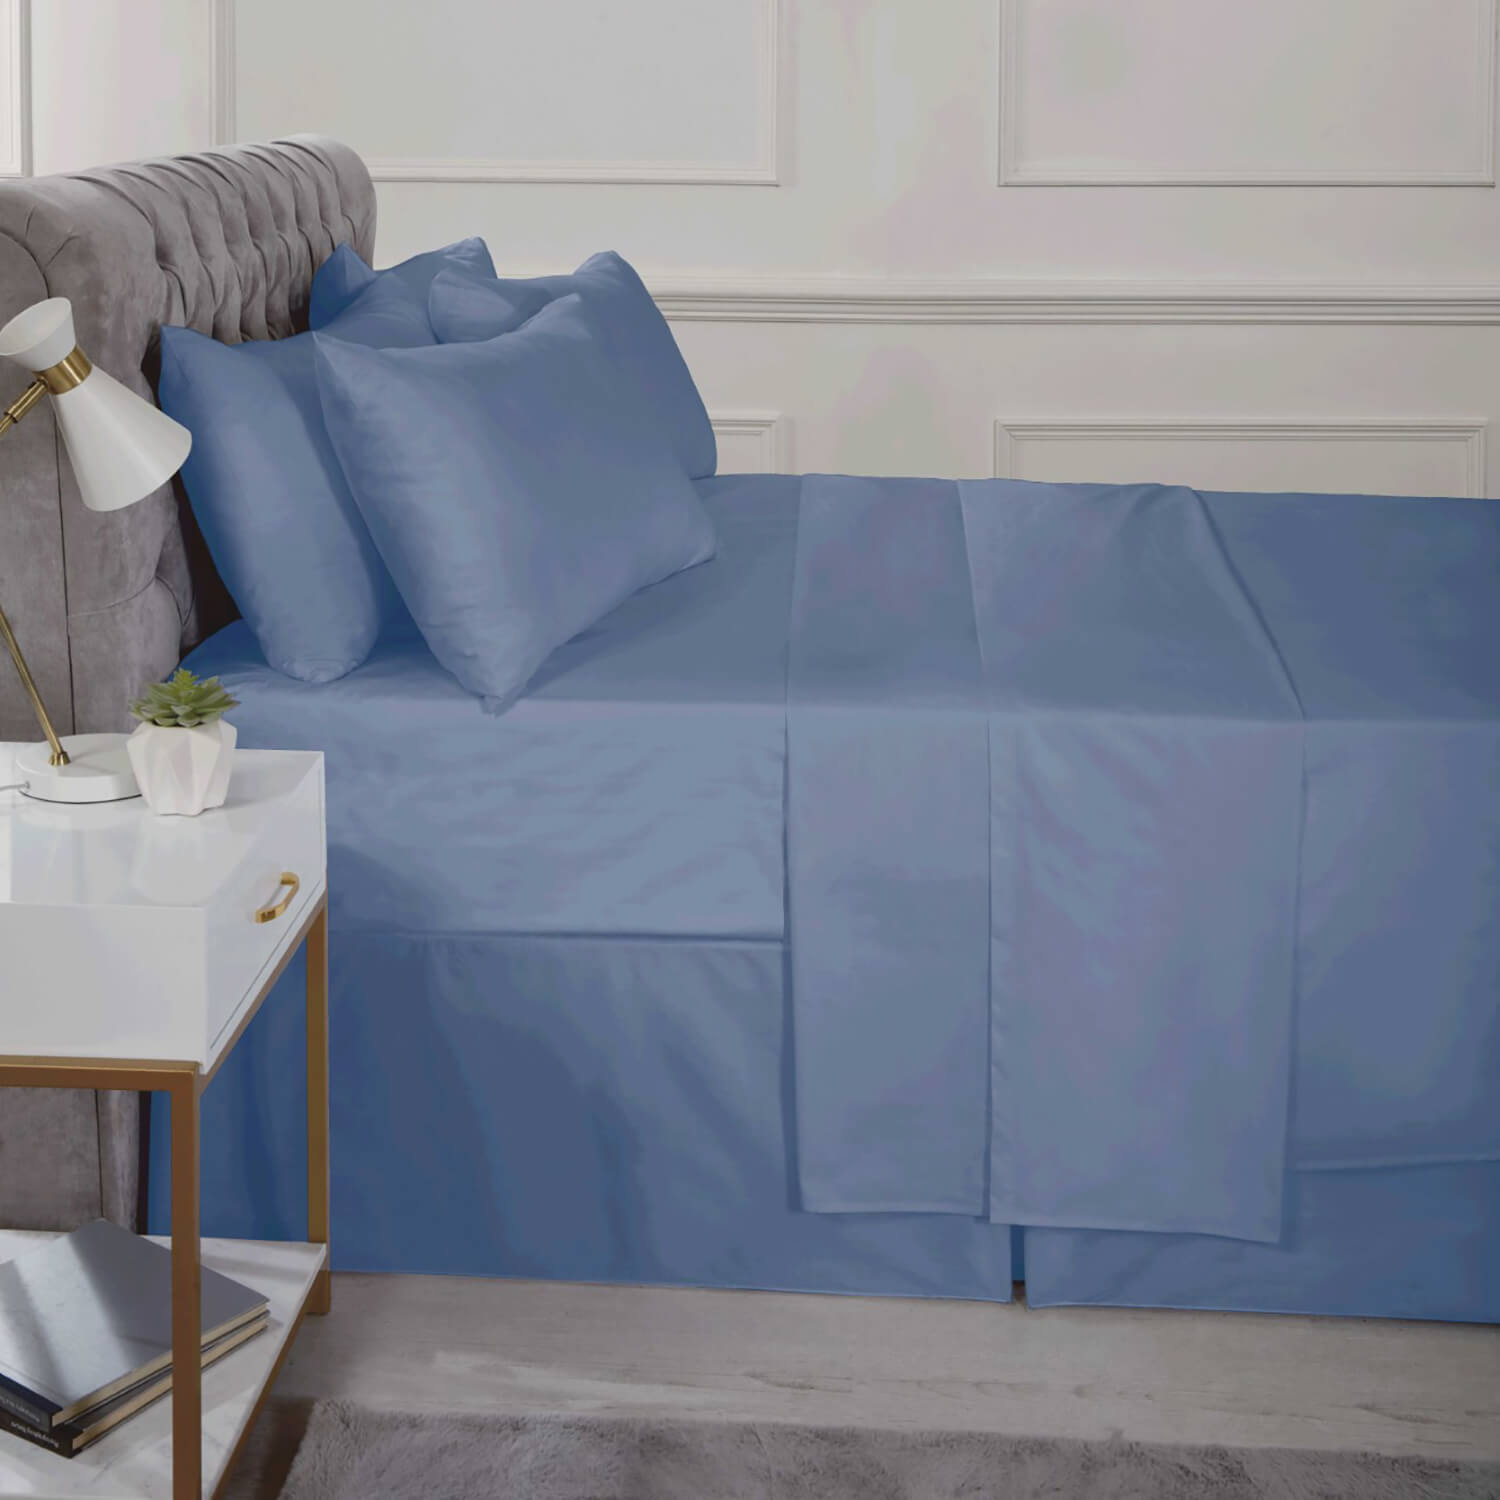 The Home Bedroom Easy Care Percale Fitted Sheet 1 Shaws Department Stores